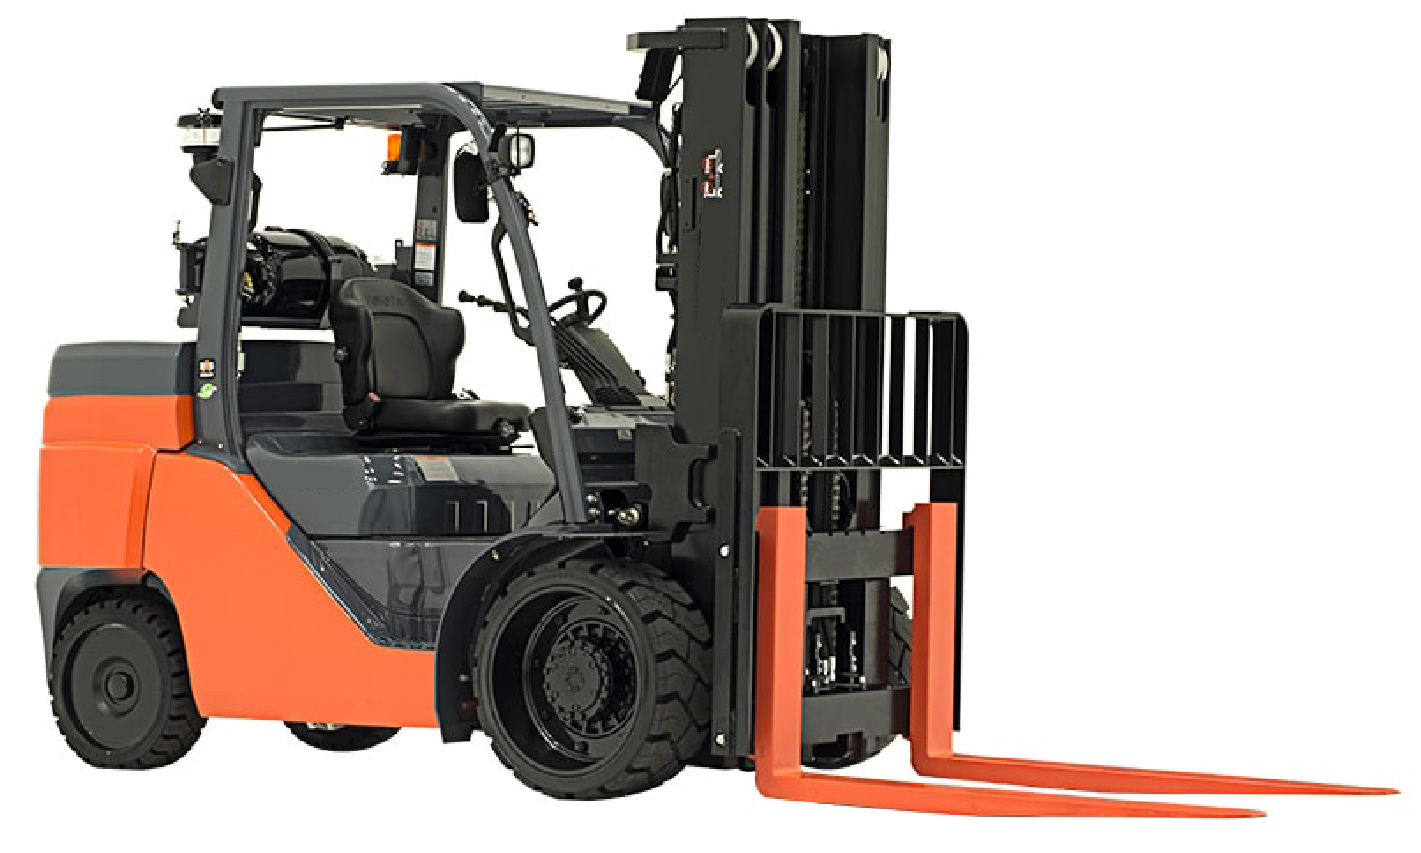 A forklift truck on a white background.